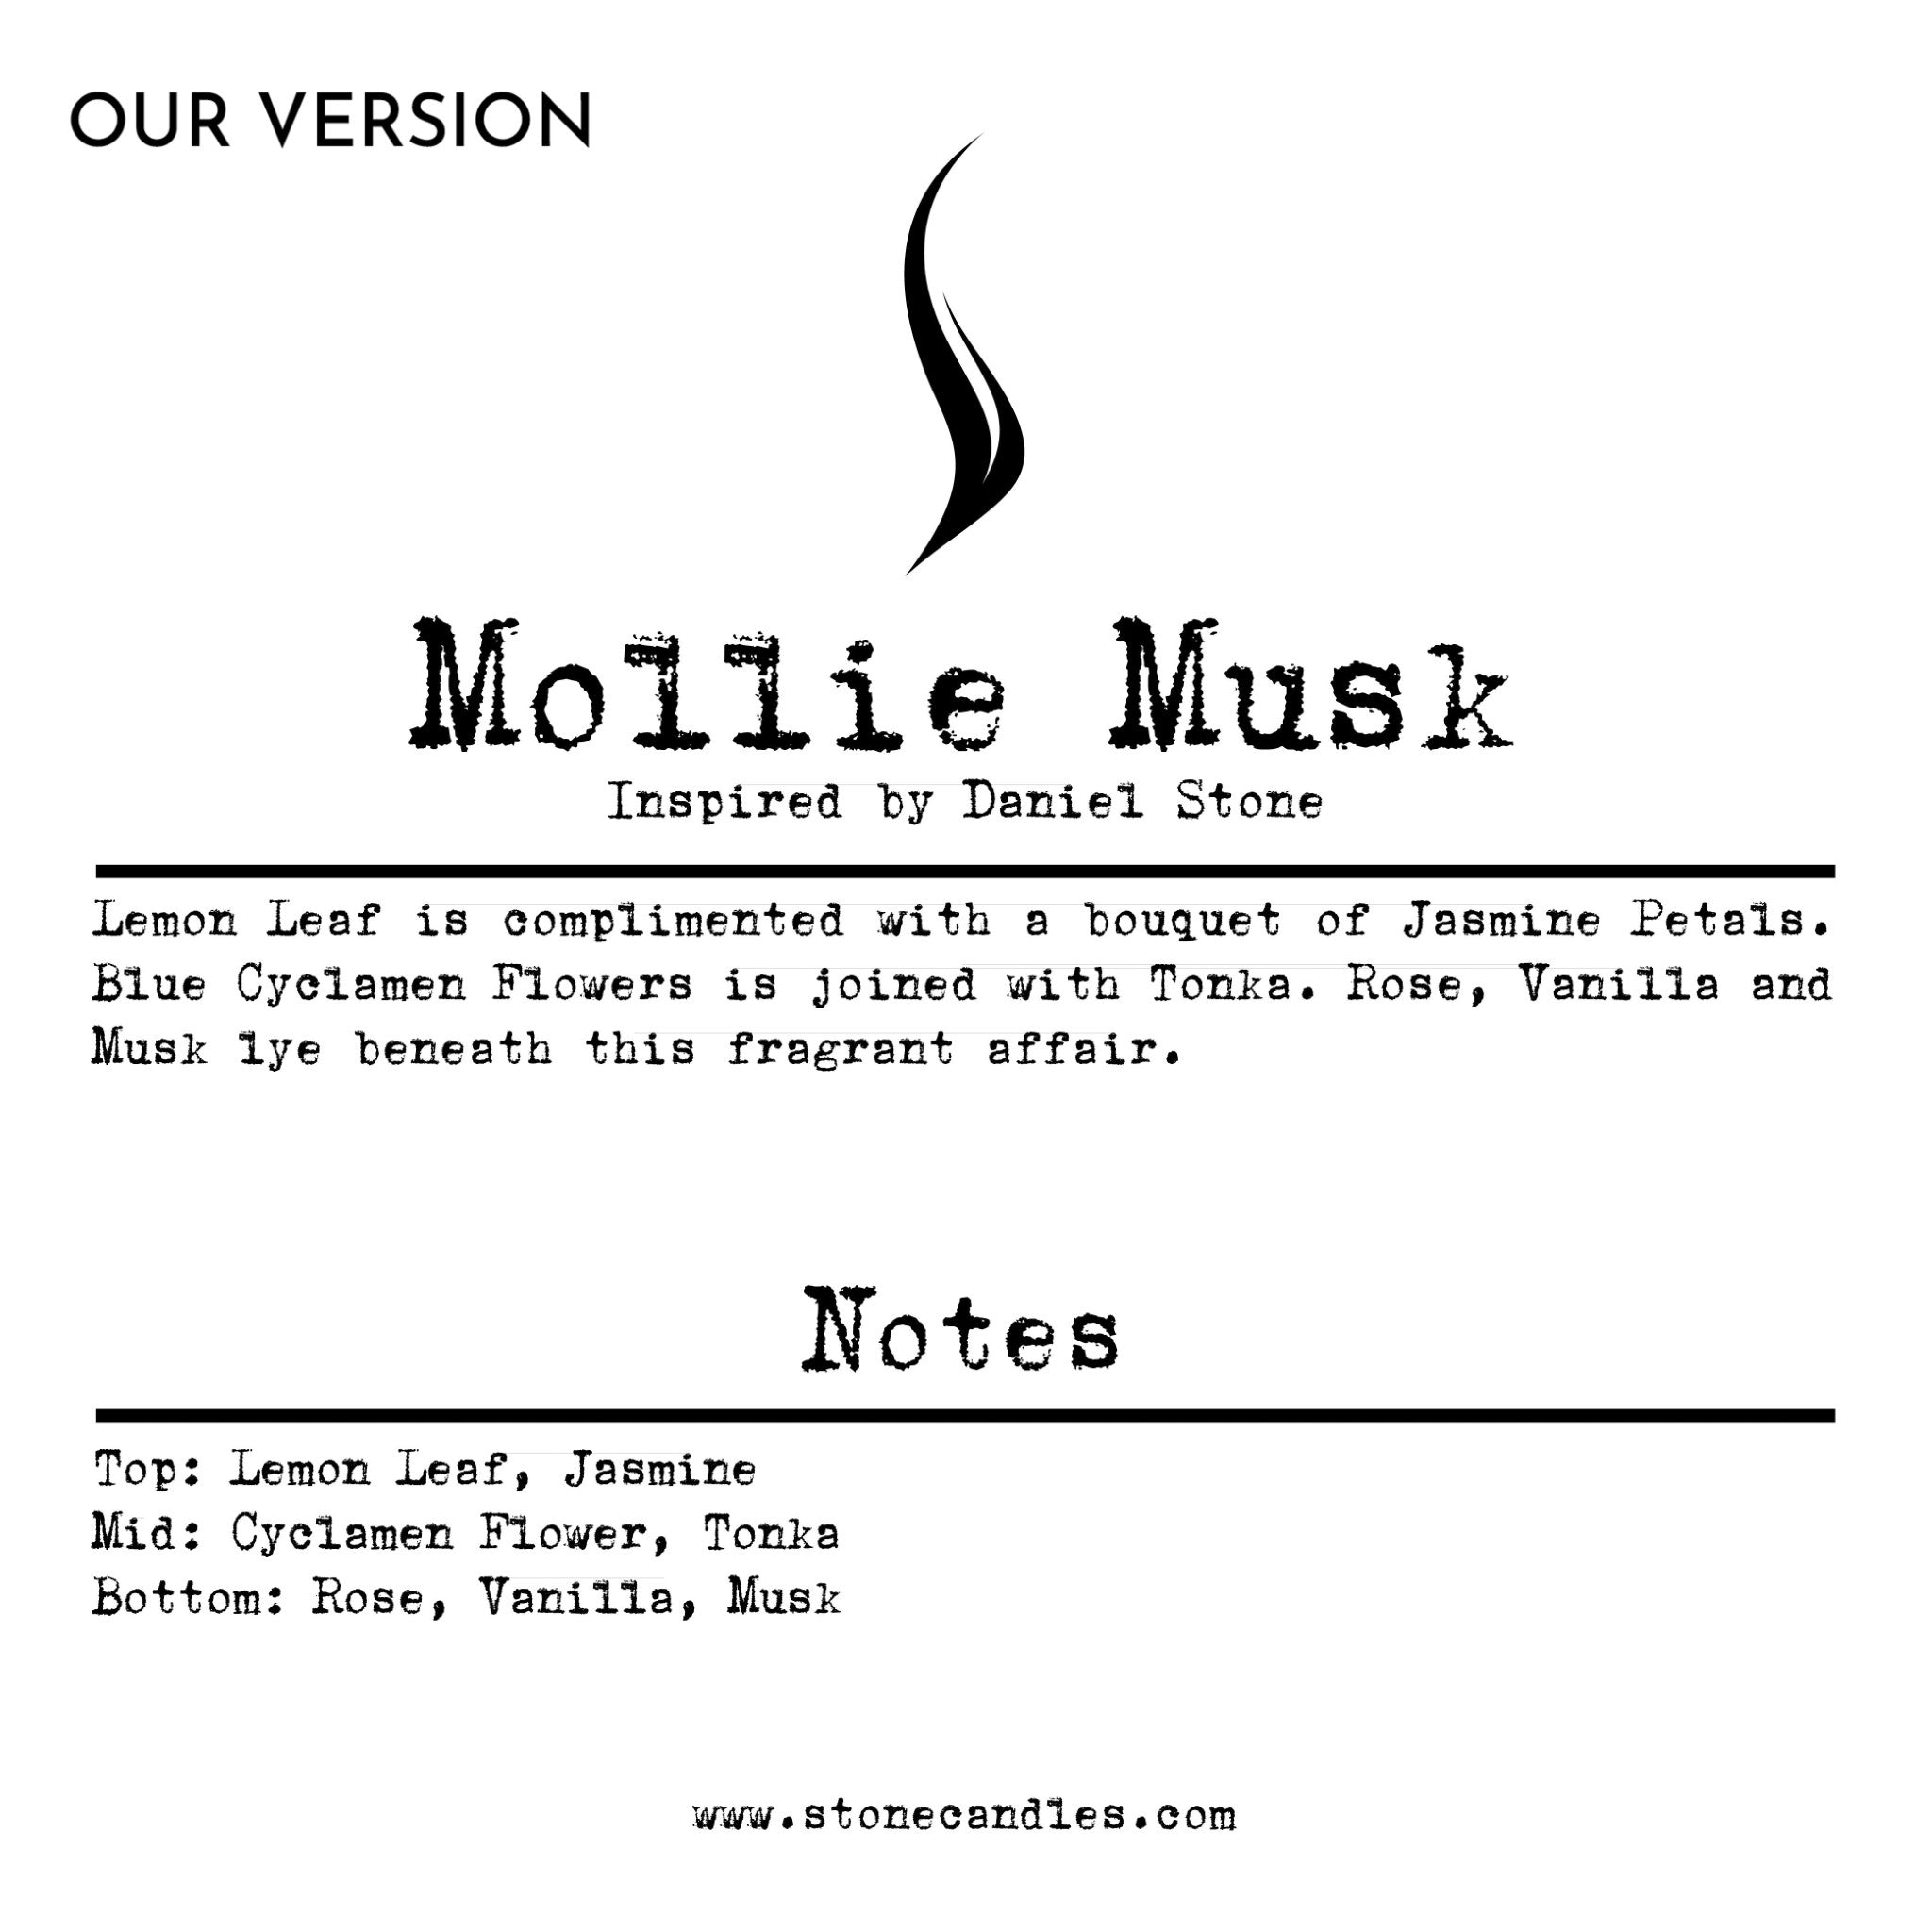 Mollie Musk (our version) Sample Scent Strip